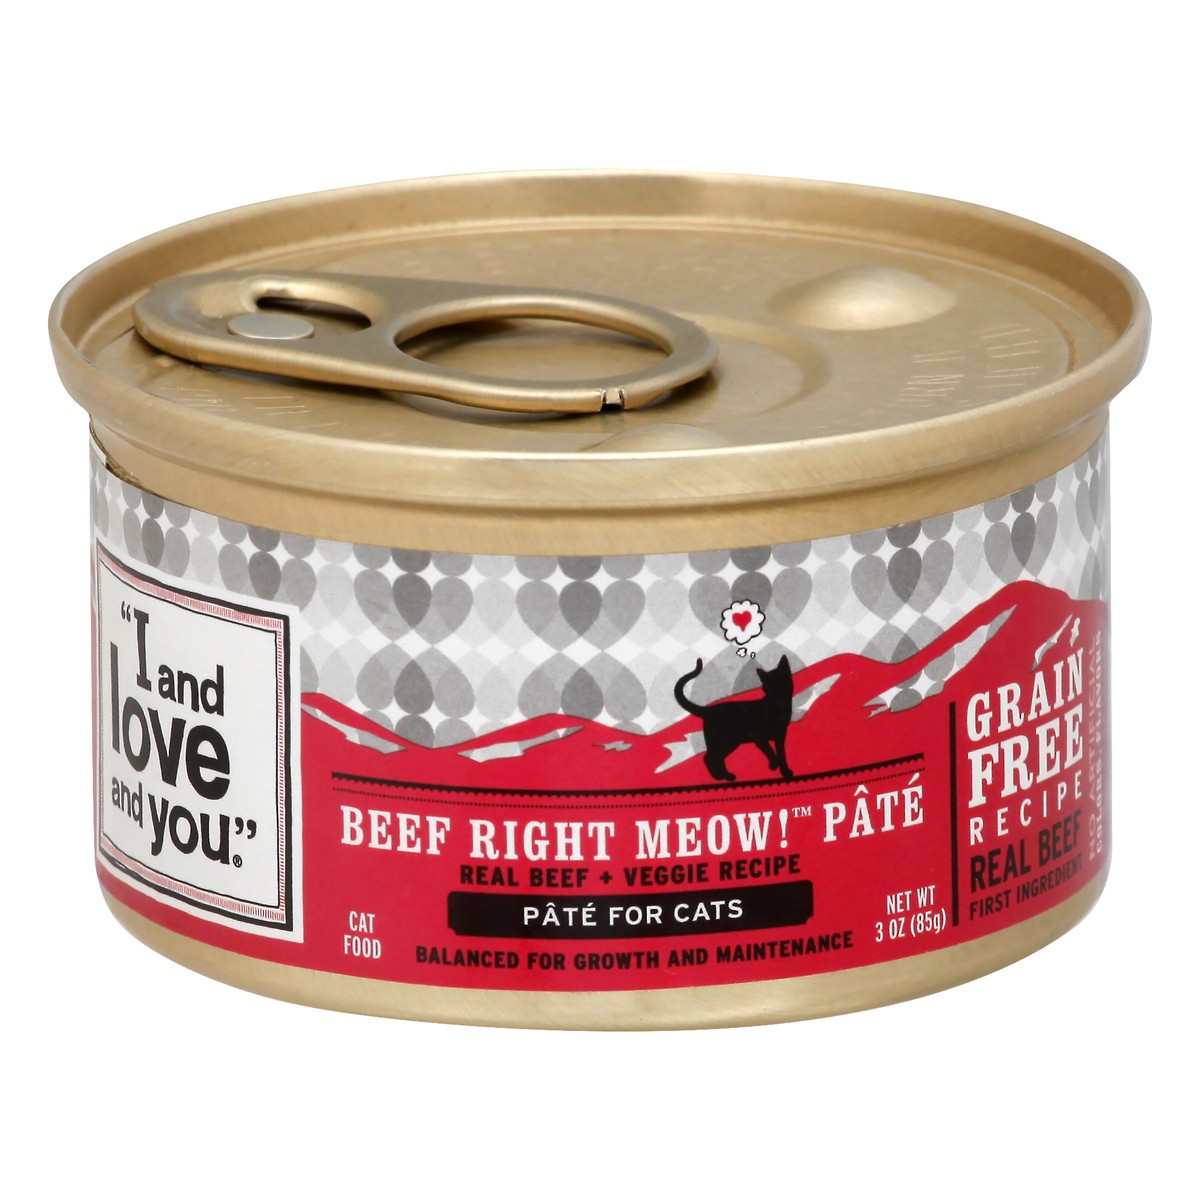 slide 1 of 11, I and Love and You Beef Right Meow! Pate Cat Food 3 oz, 24 ct; 3 oz